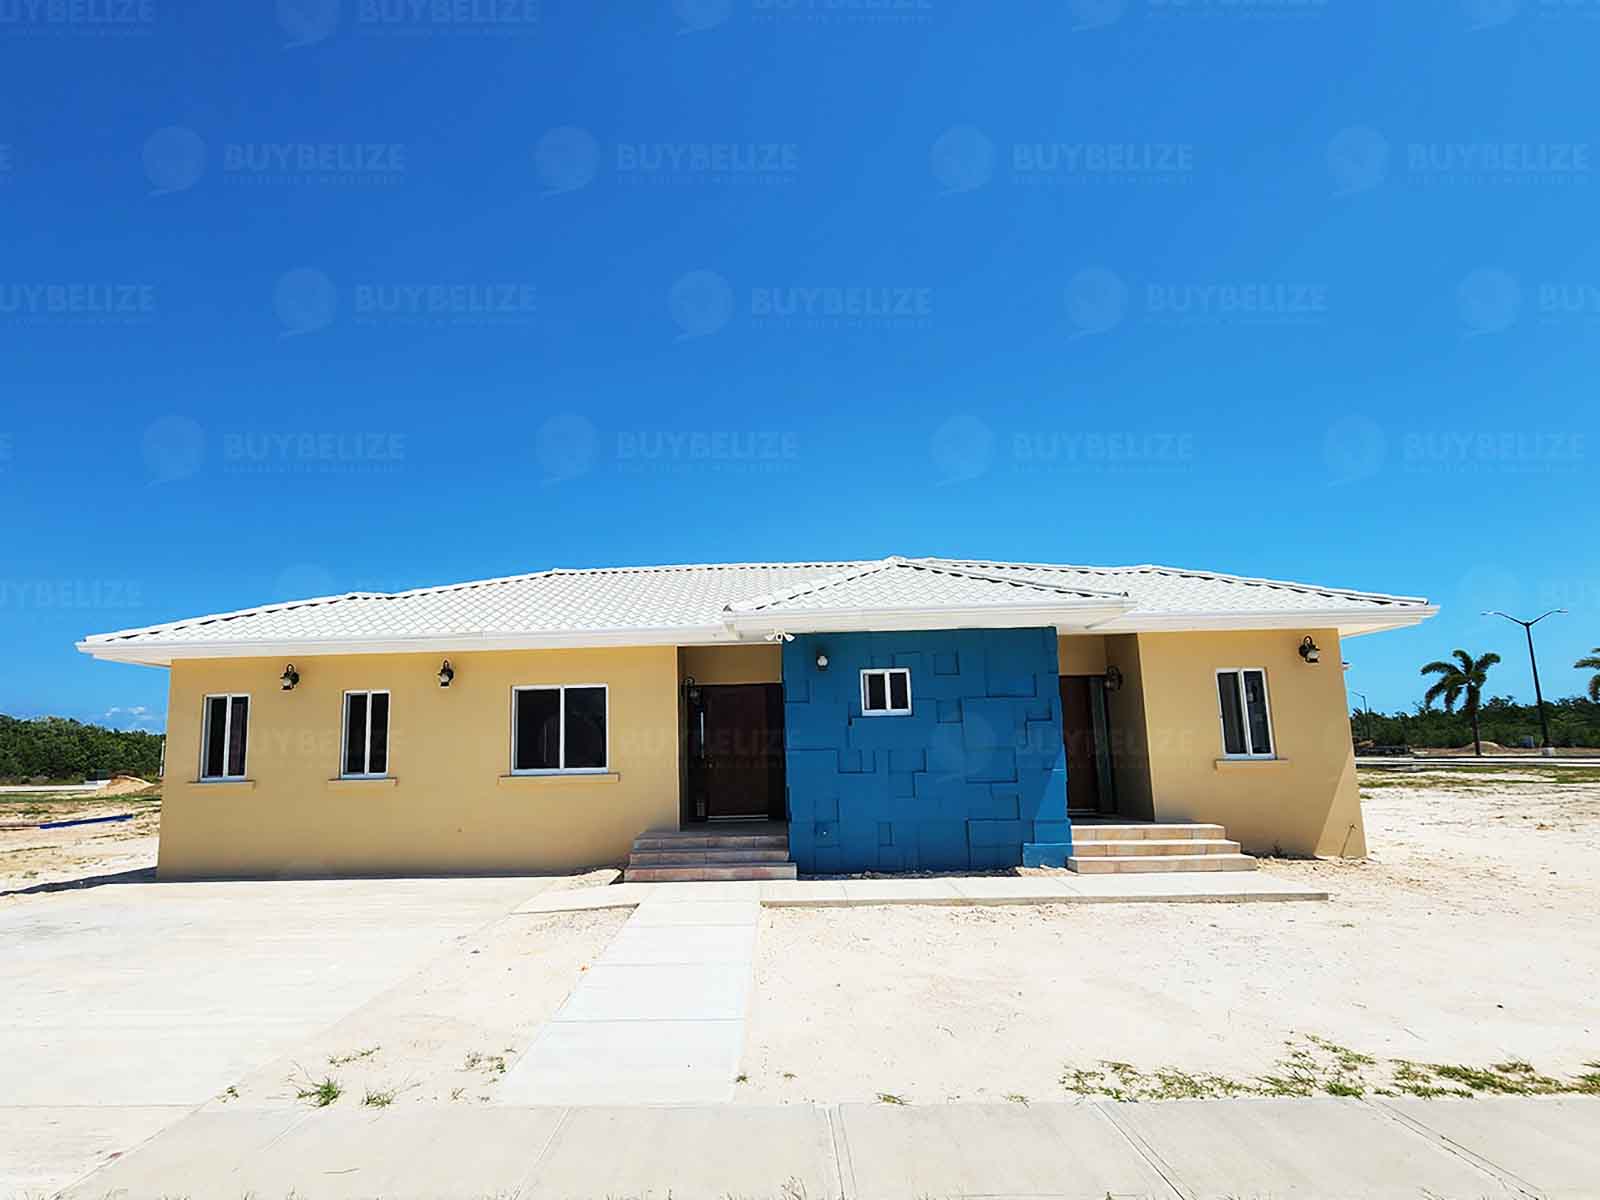 3 Bed 2 Bath Modern House For Rent in Gated Community